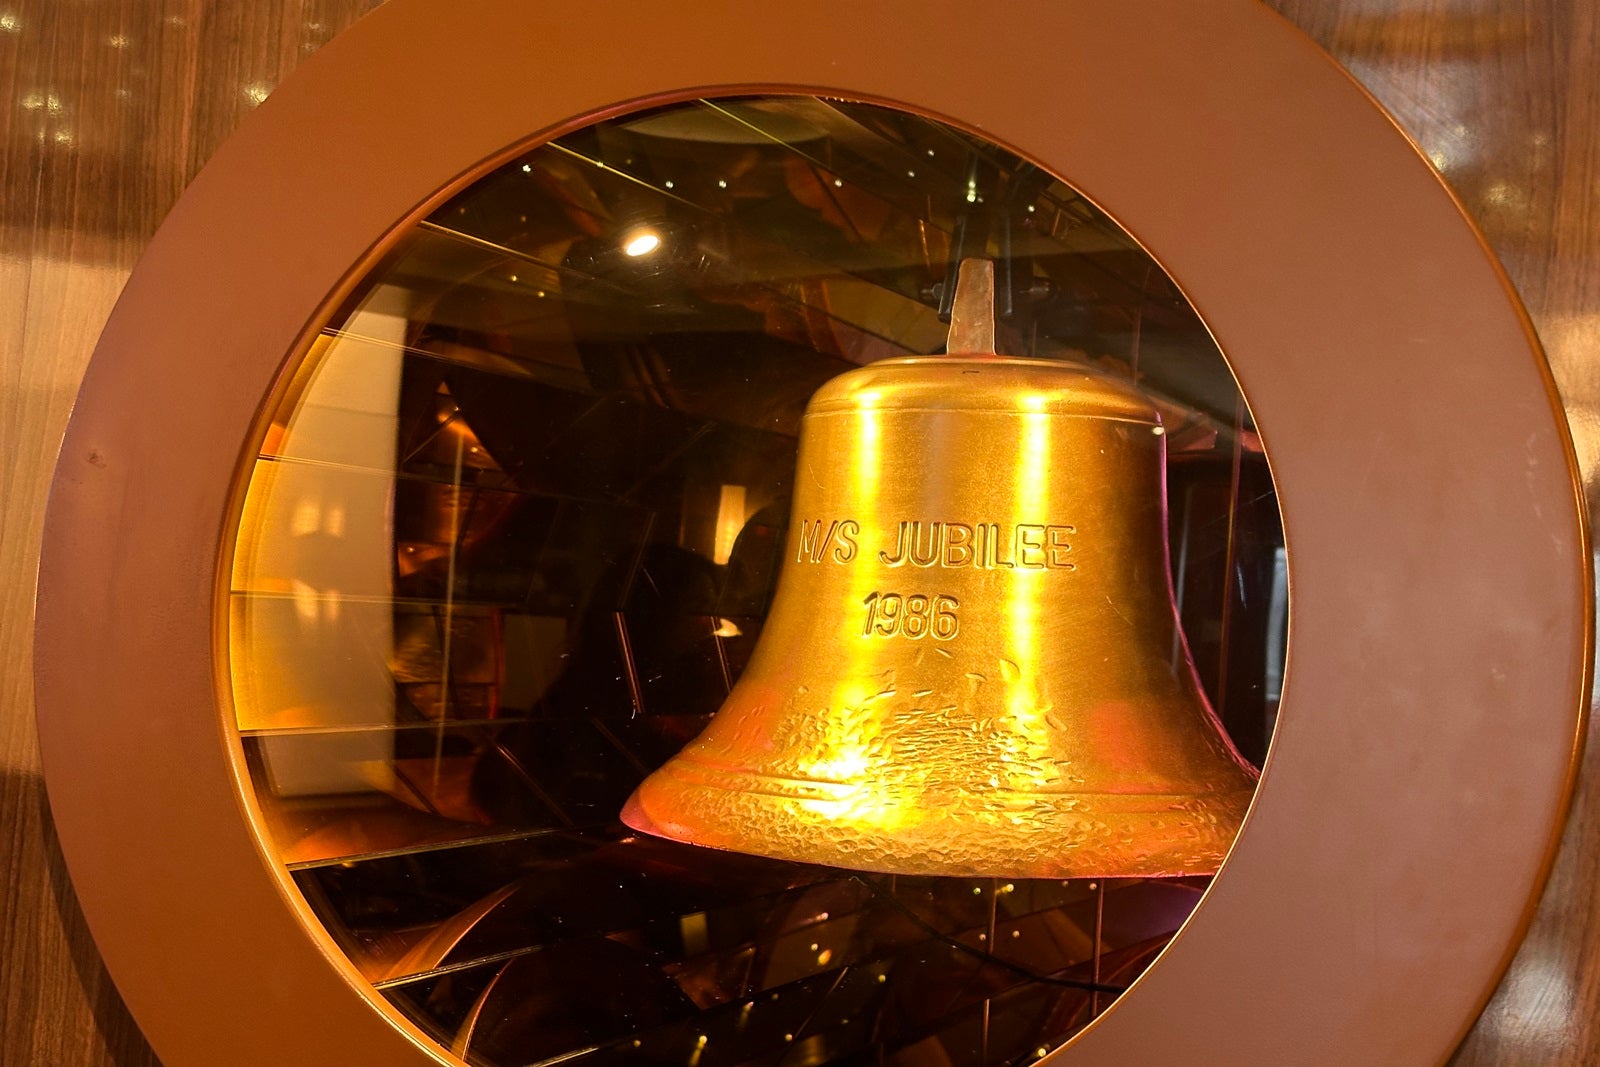 A ship's bell in a protective case, displaying the name of the original MS Jubilee